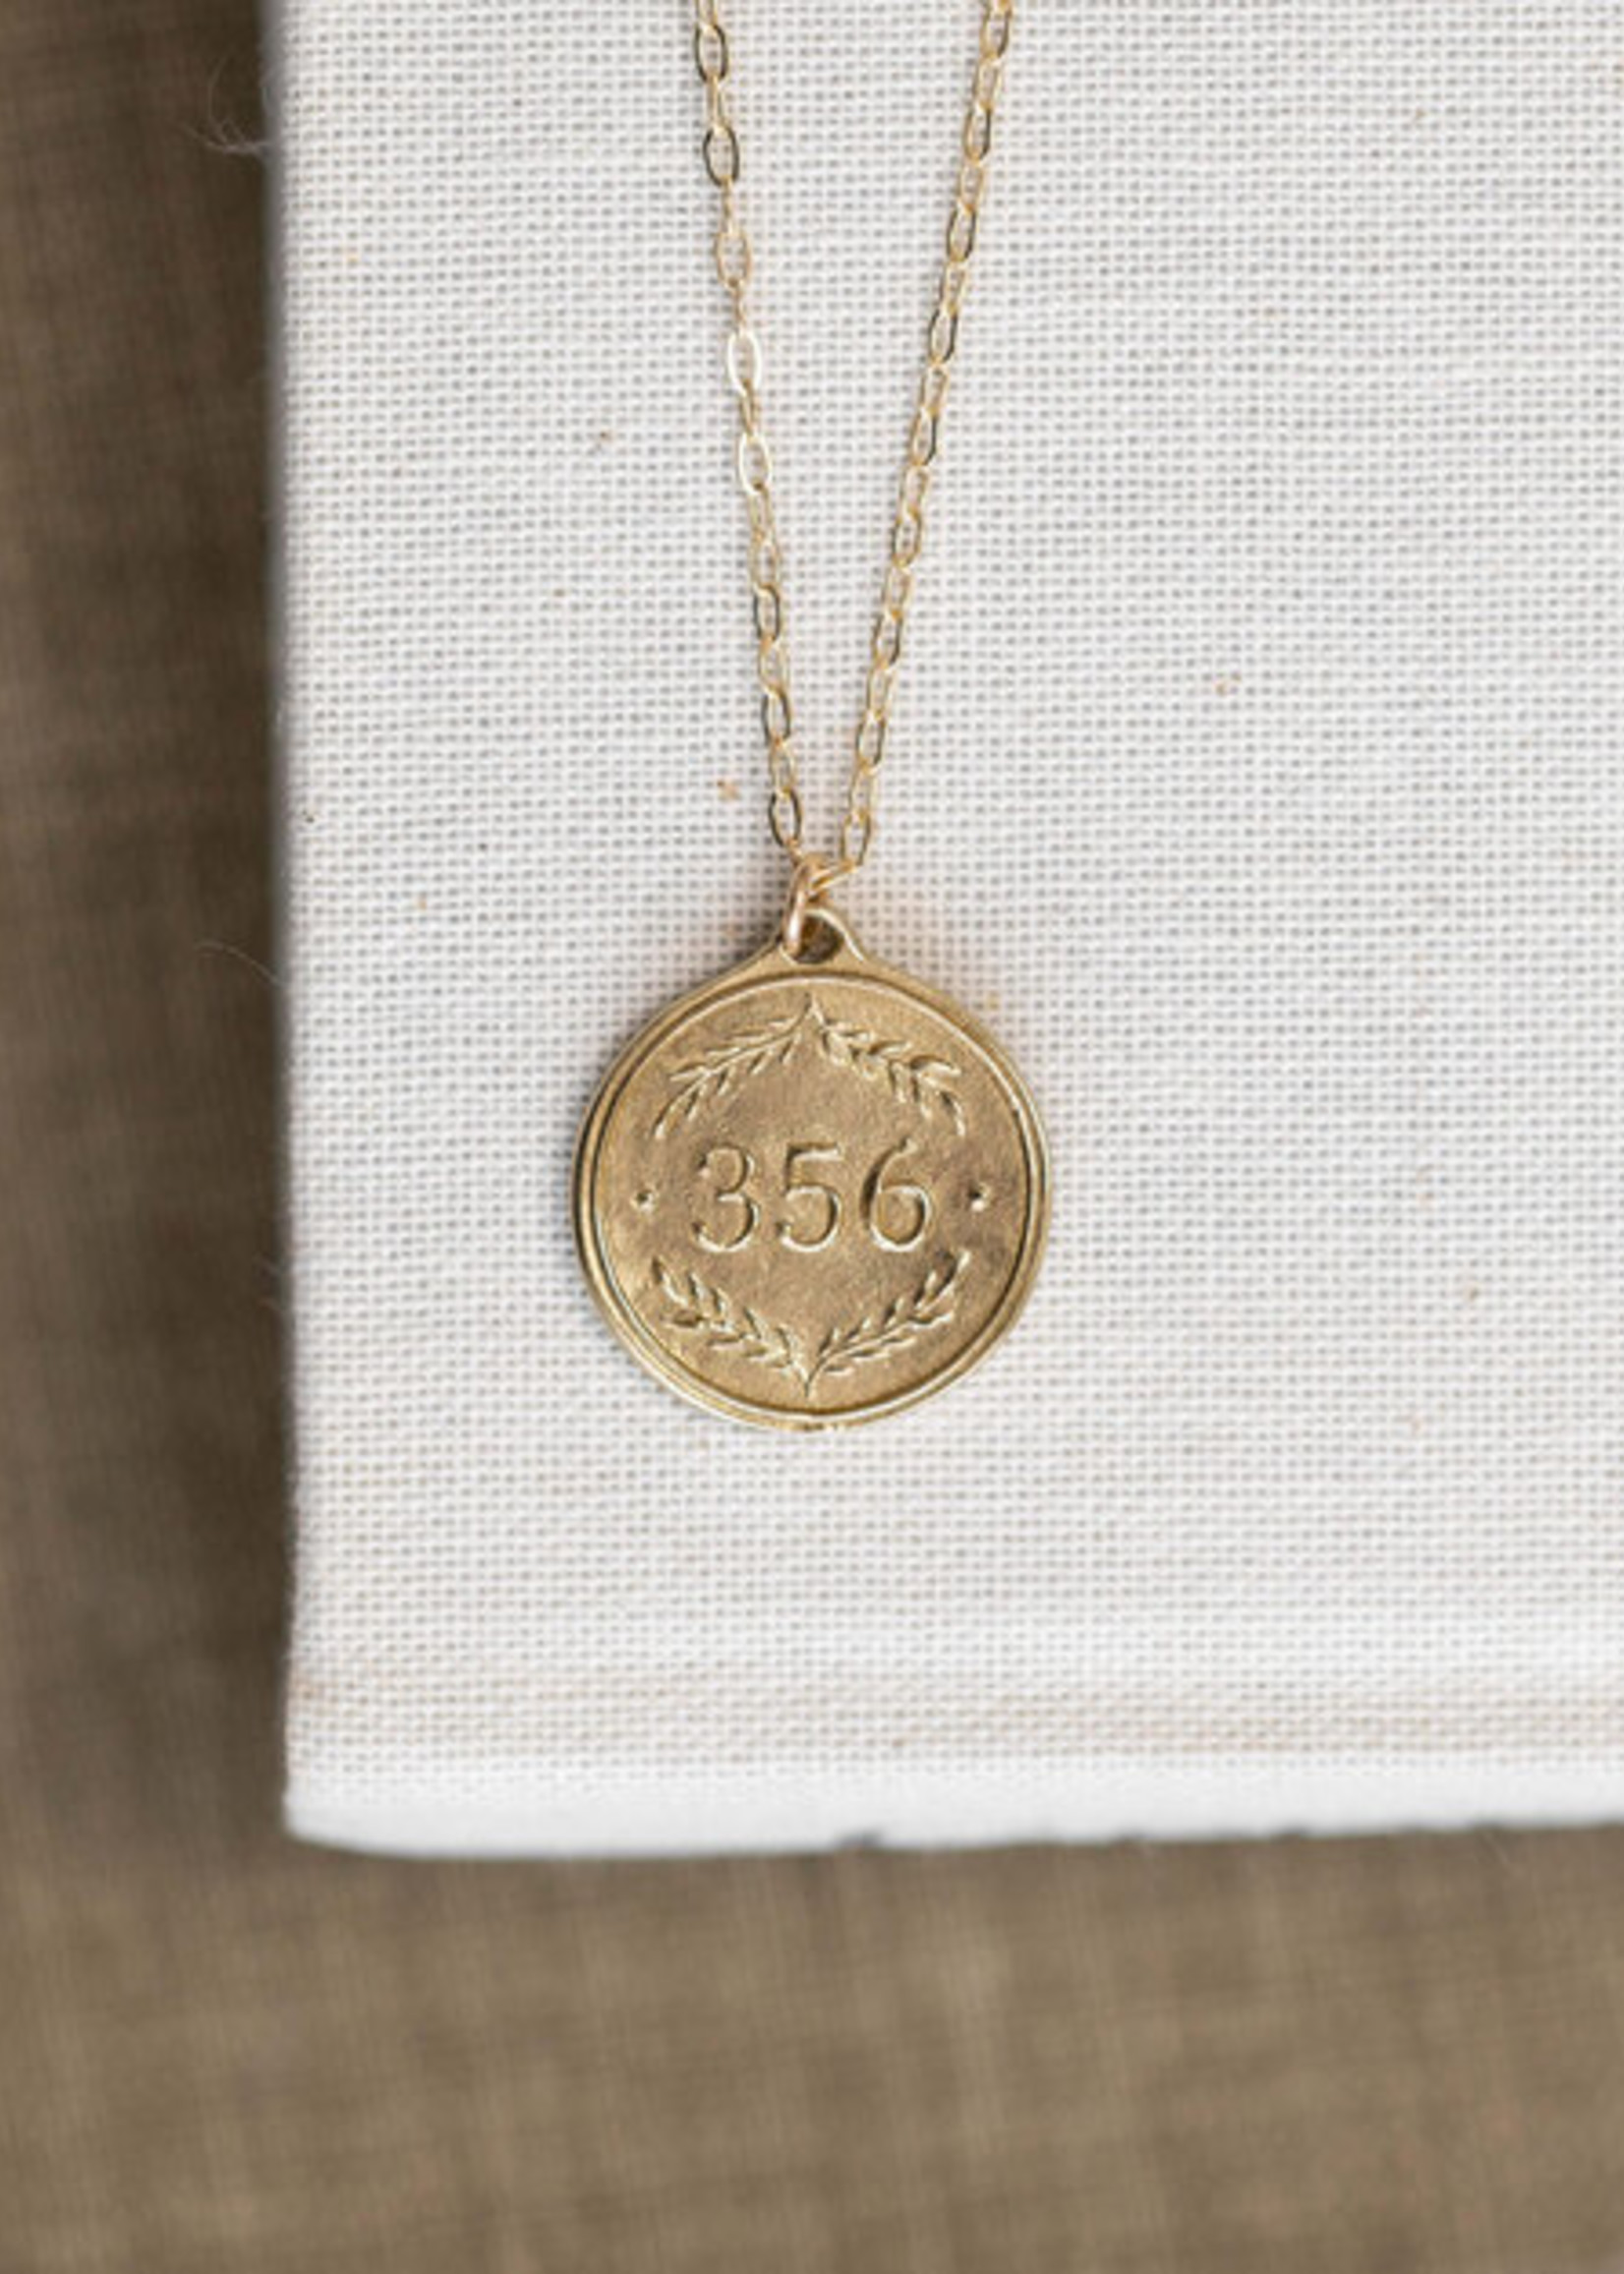 Scripture Inspired Pendant Necklace PROVERBS 3:5-6 32"